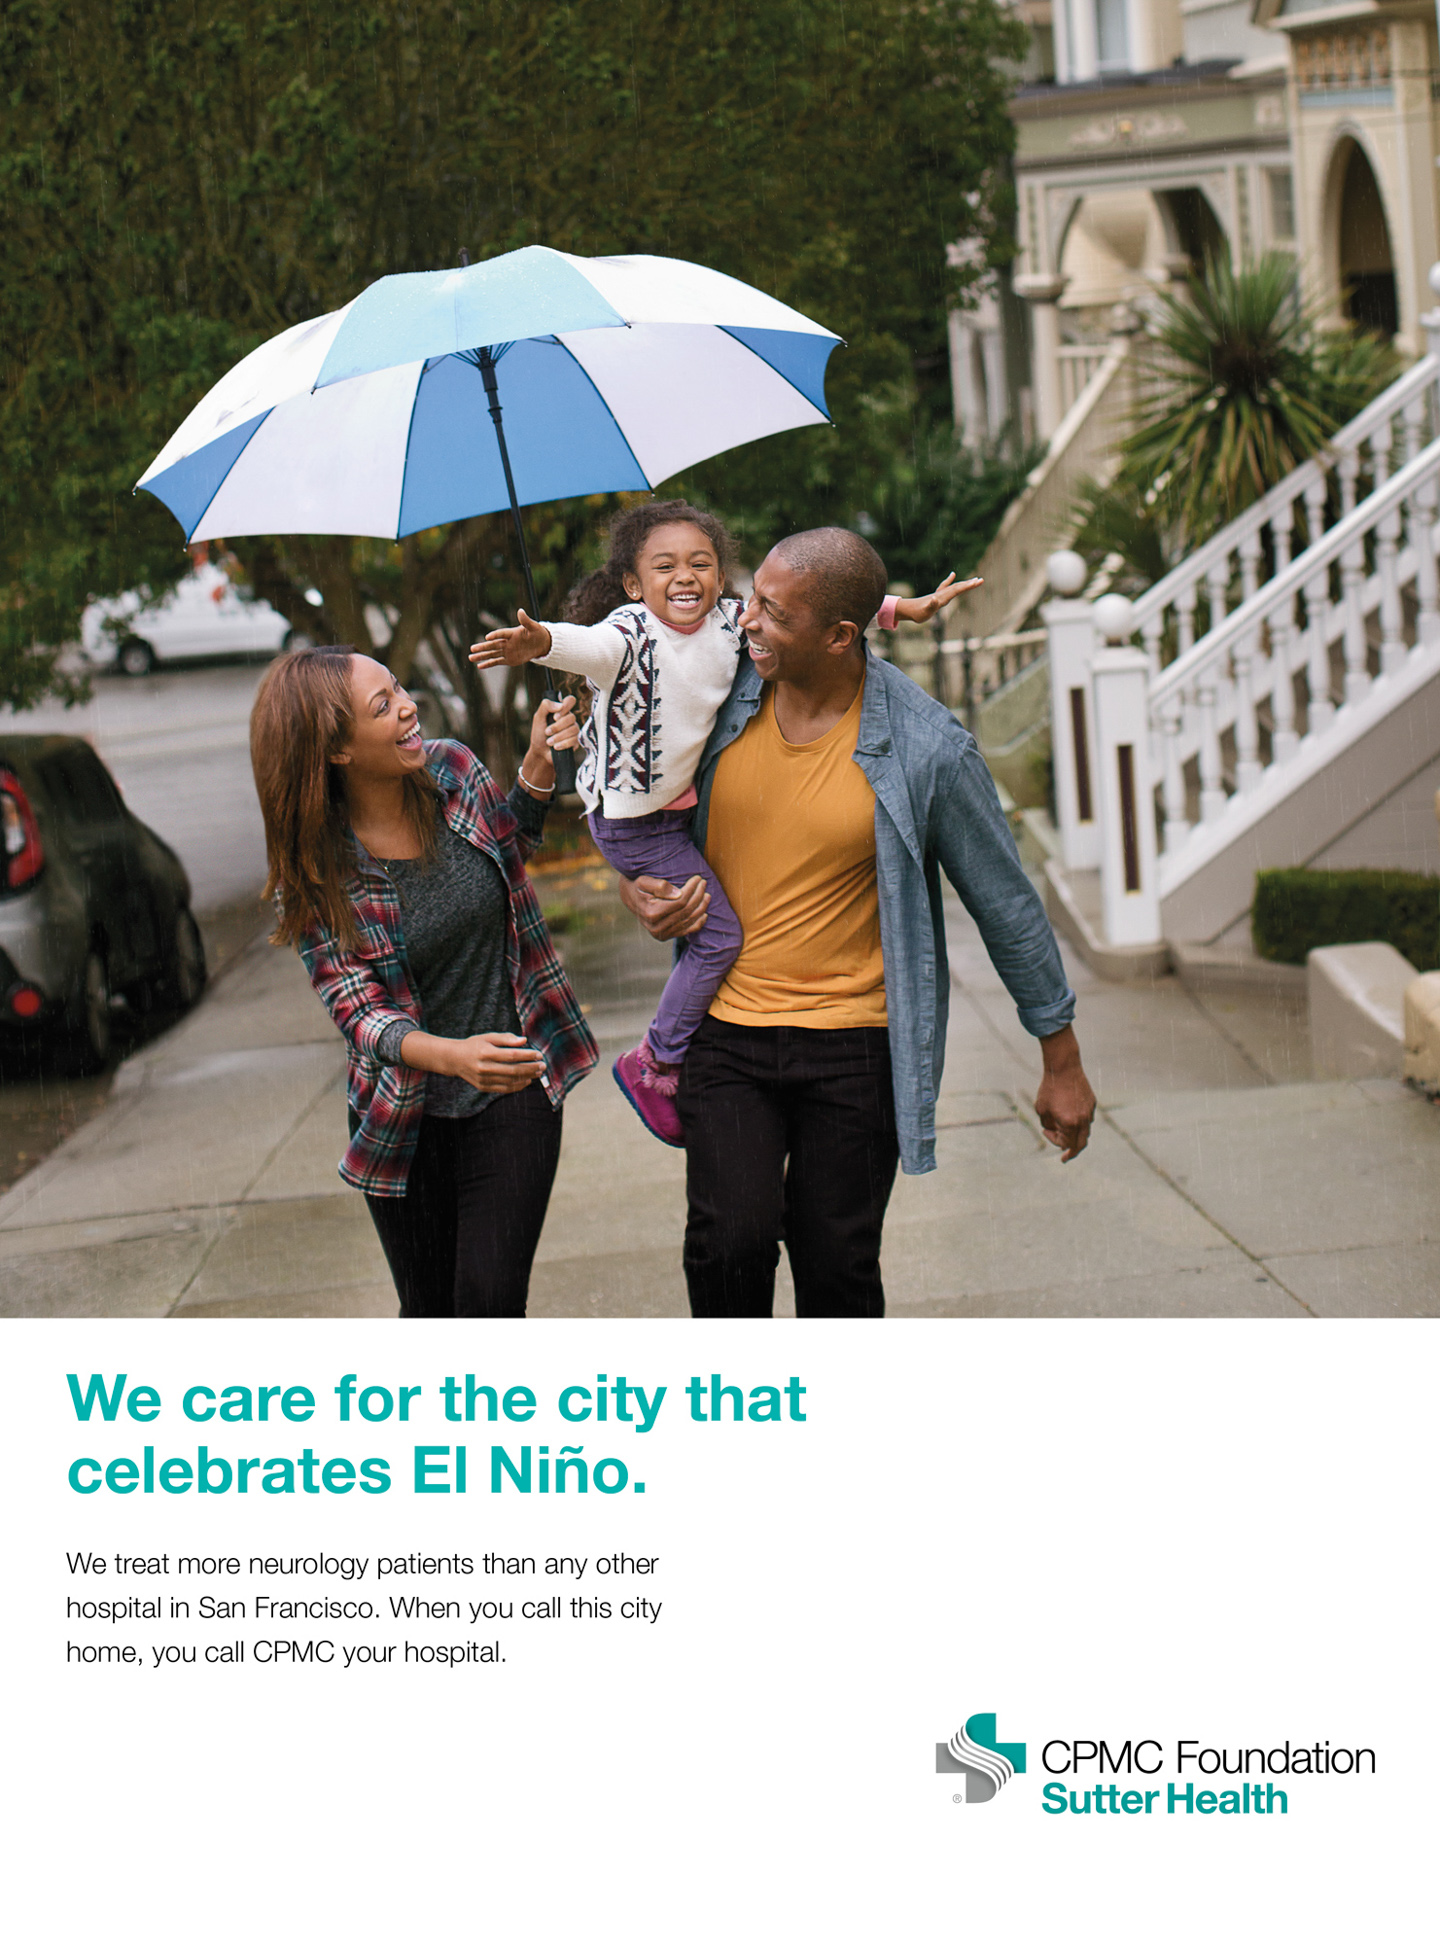 A woman, man + their young daughter walk together in the rain under an umbrella in a Healthcare Ad Campaign photographed by Lifestyle Photographer Diana Mulvihill